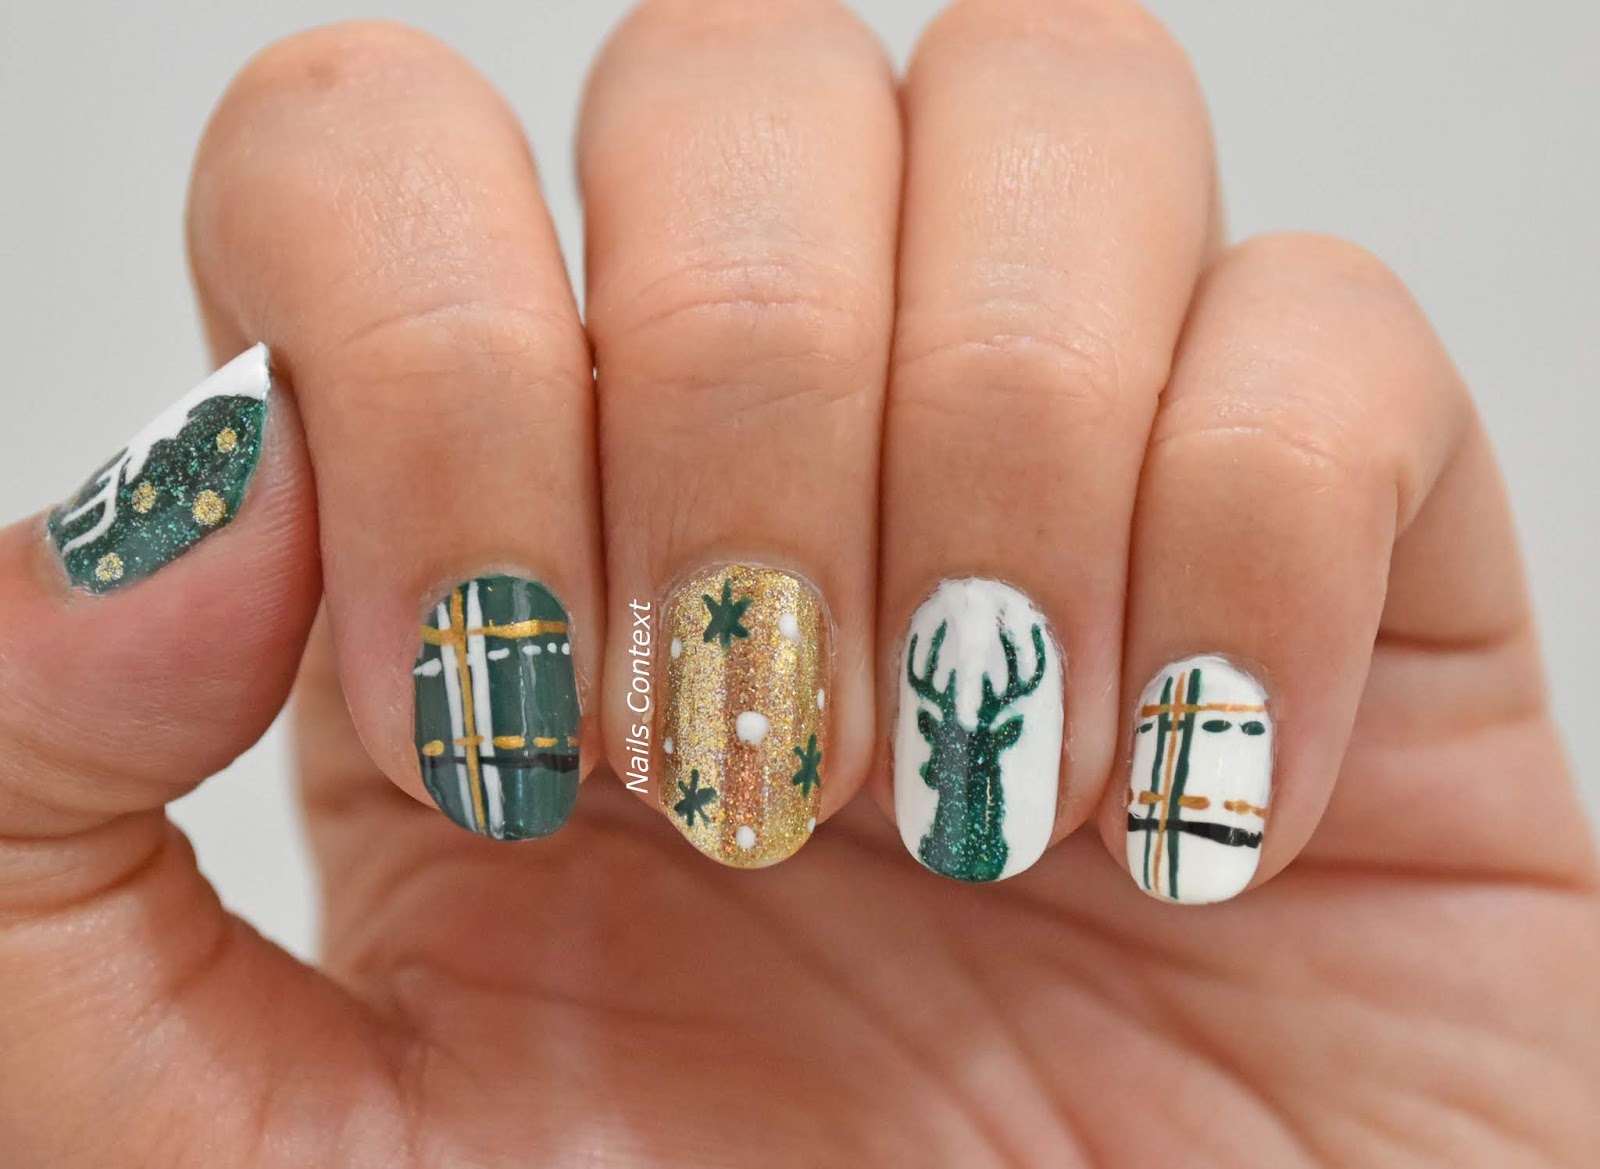 7. "Holiday Nail Art: Father Christmas and Reindeer Nails" - wide 9